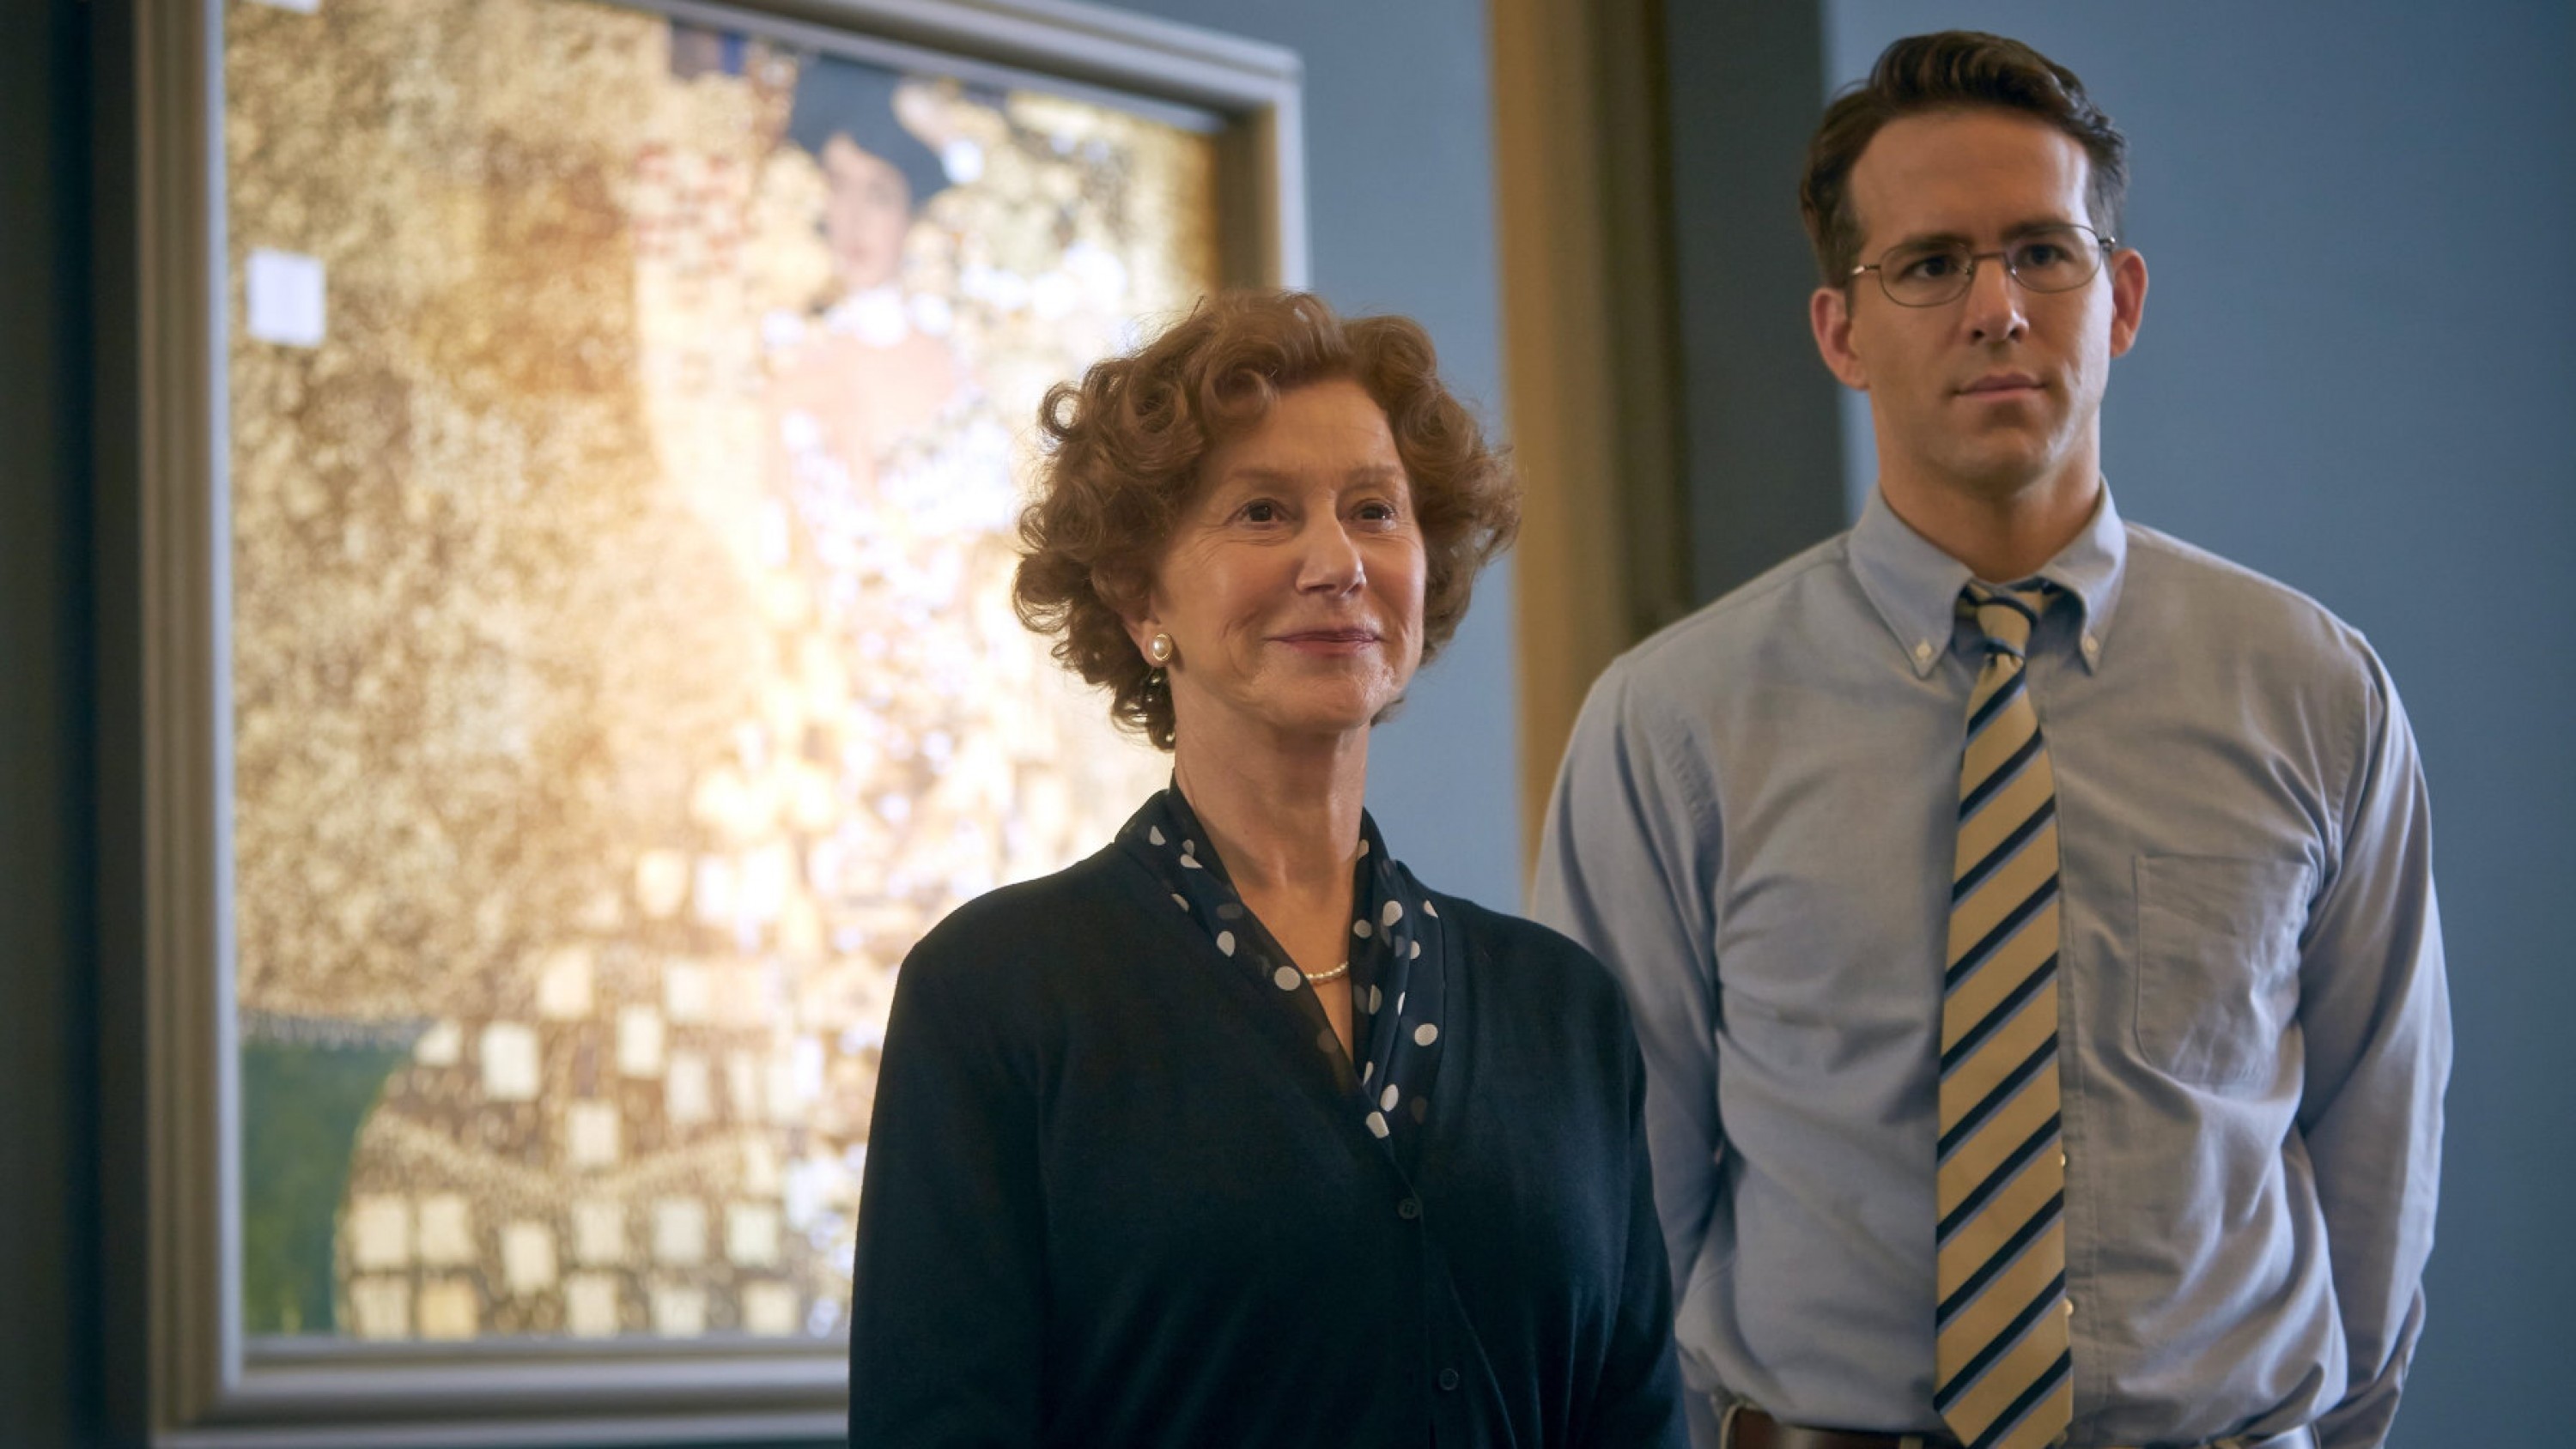 Resource - Woman in Gold: Film Guide - Into Film